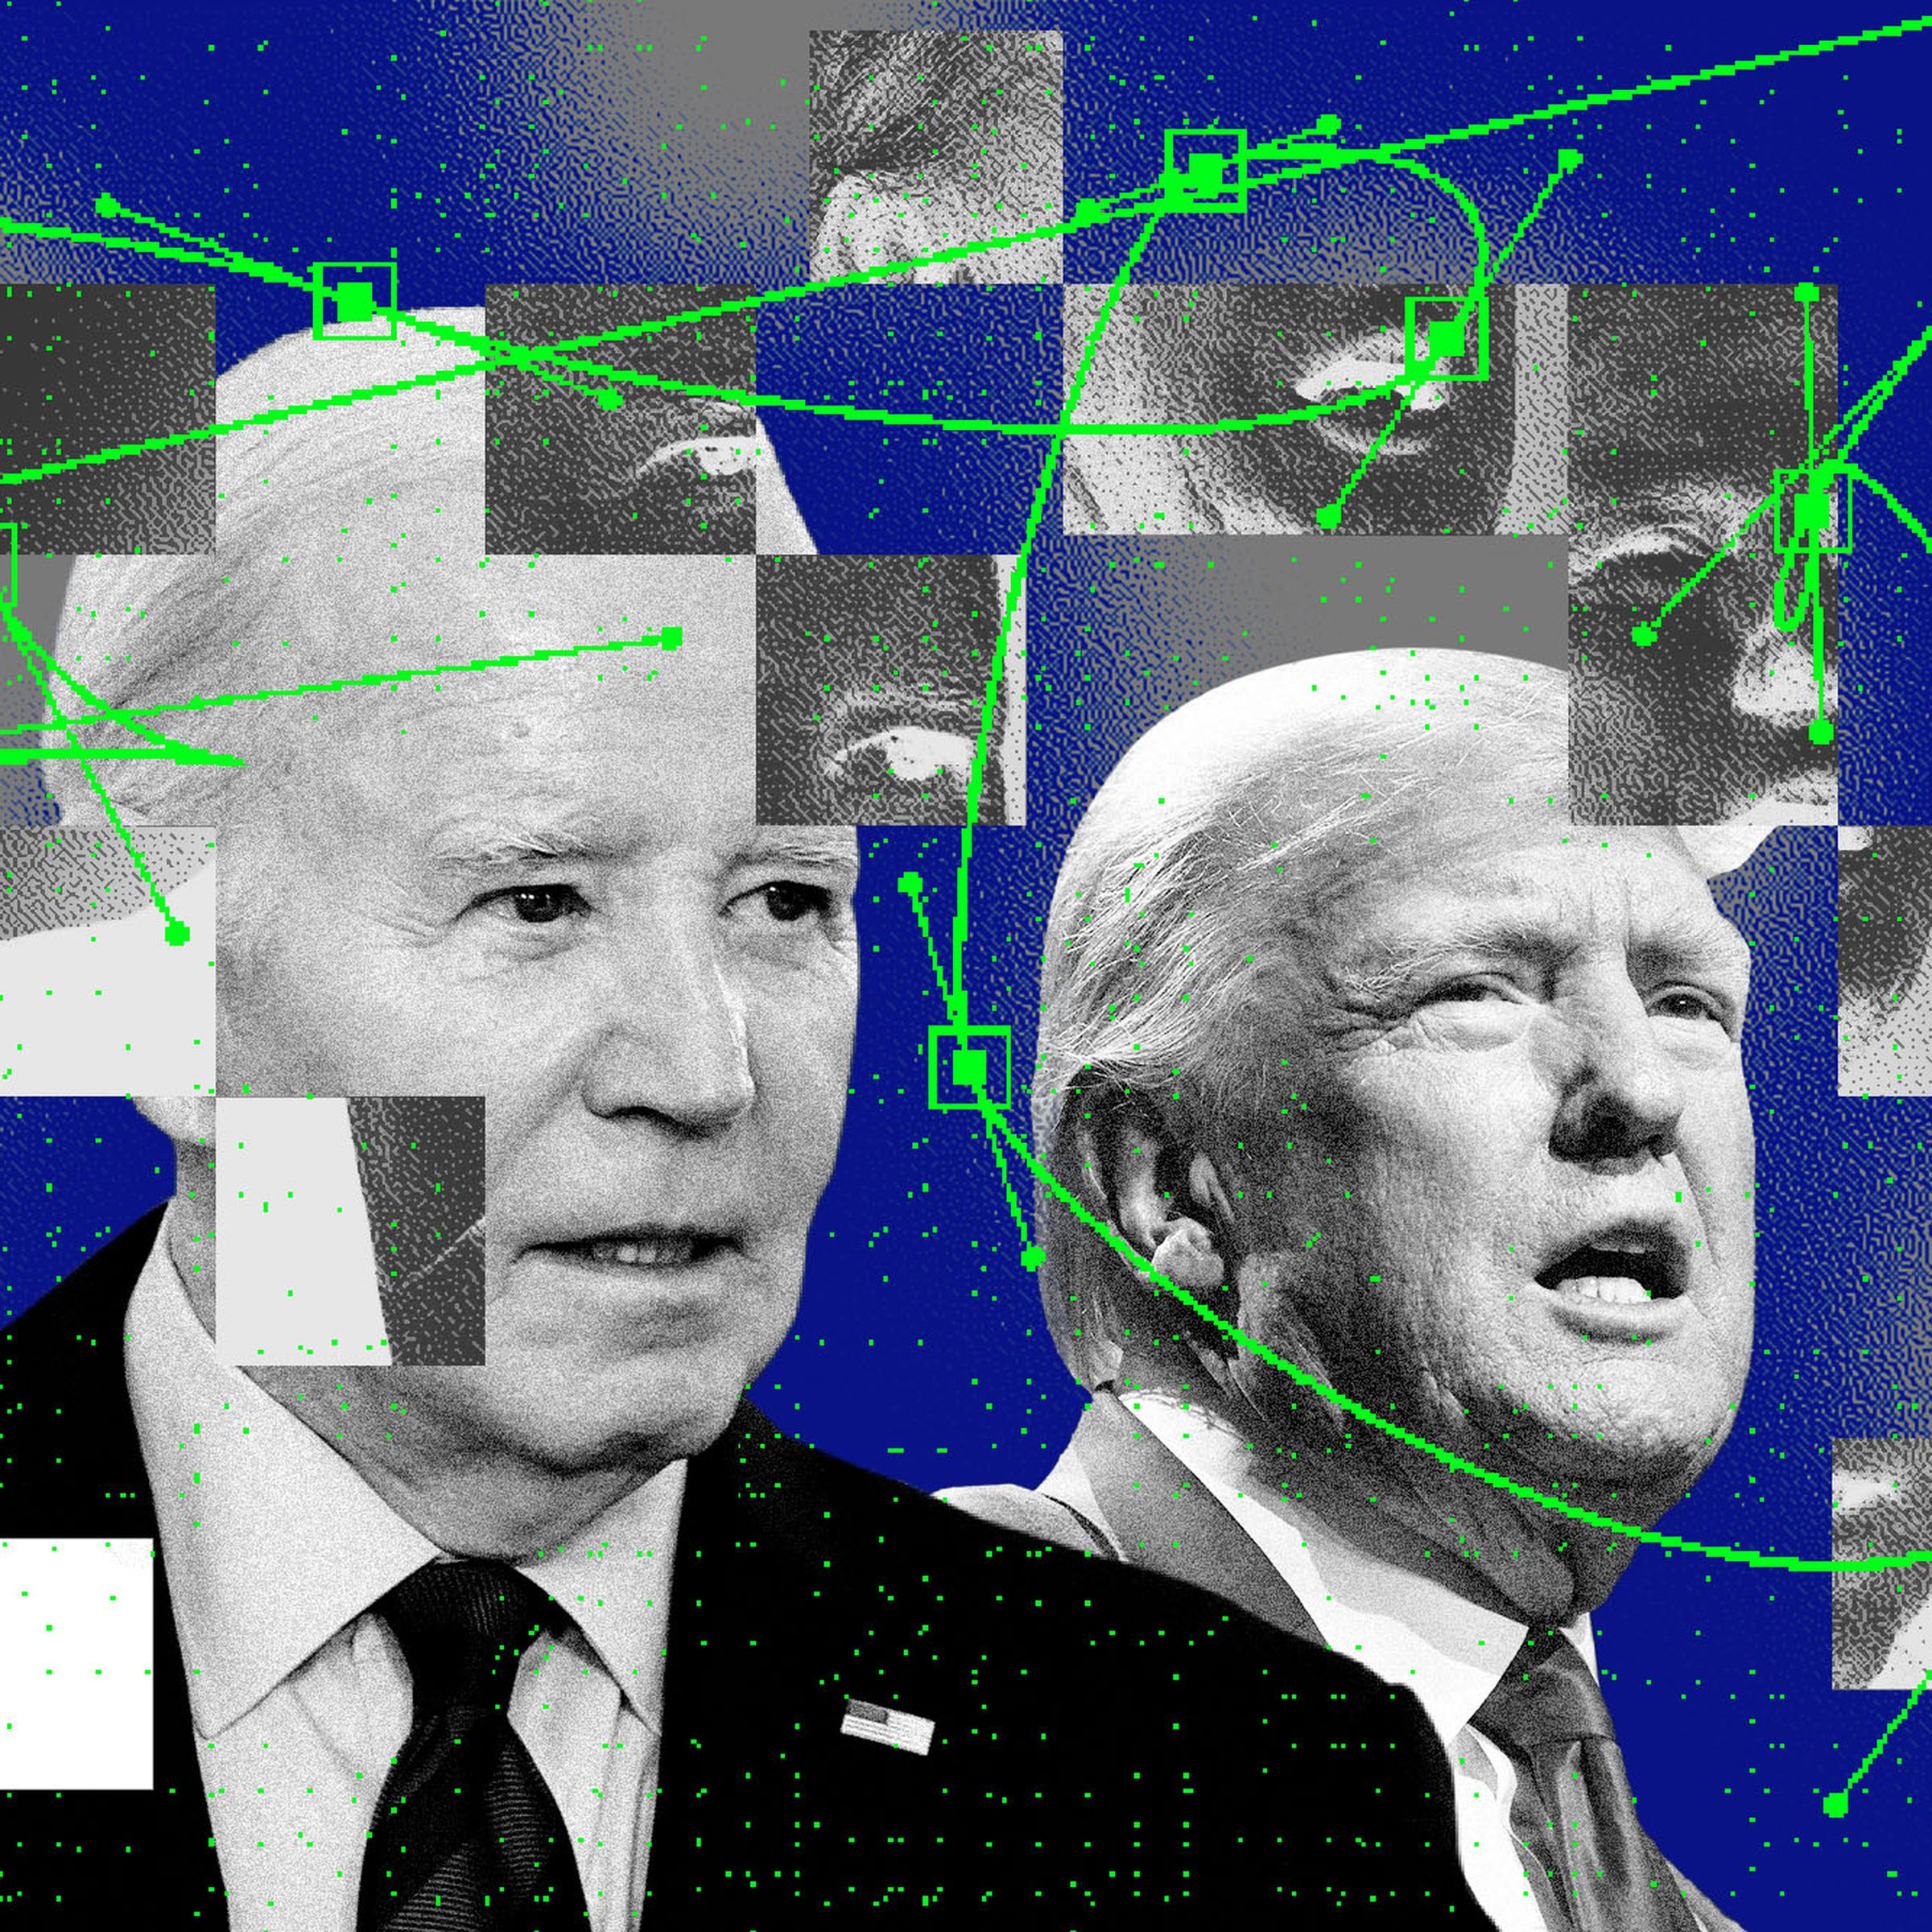 Photo illustration of Joe Biden and Donald Trump ‘s faces being used for deep fake videos.